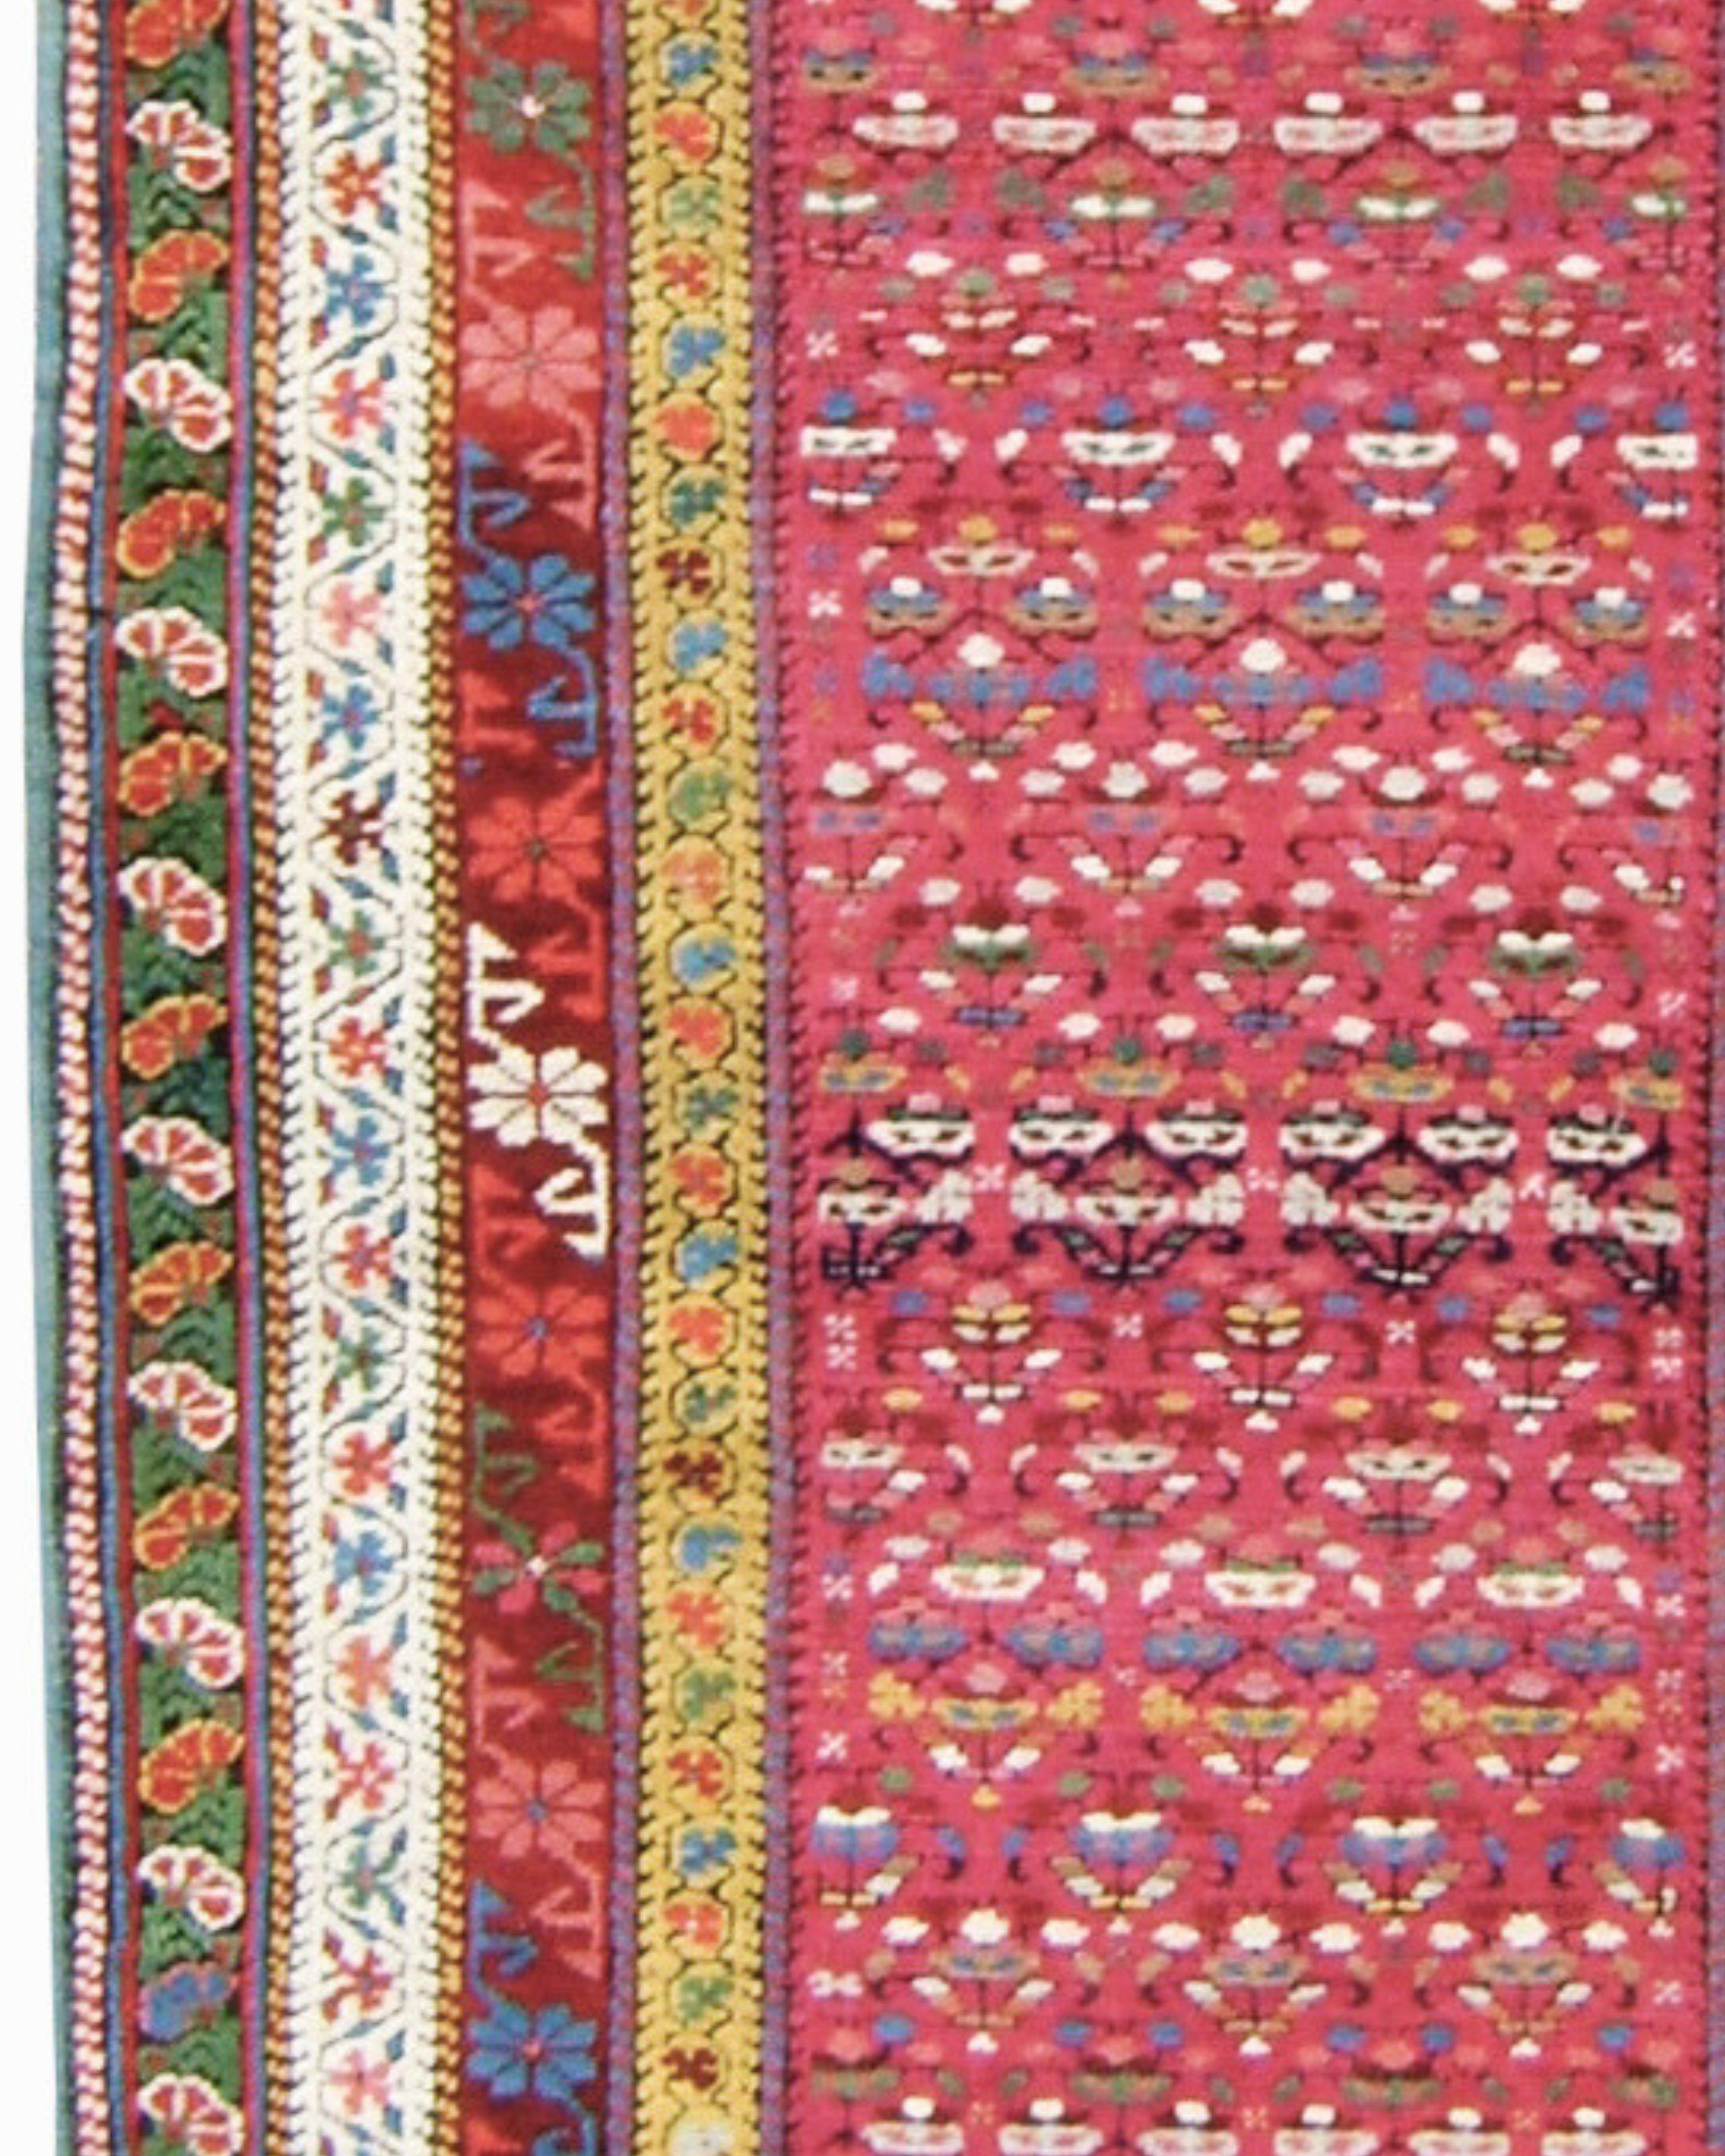 Antique Caucasian Kuba Runner Rug, 19th Century 

A vibrant runner combining shades of raspberry, green, gold, ivory, and blue.

Additional Information:
Dimensions: 3'7